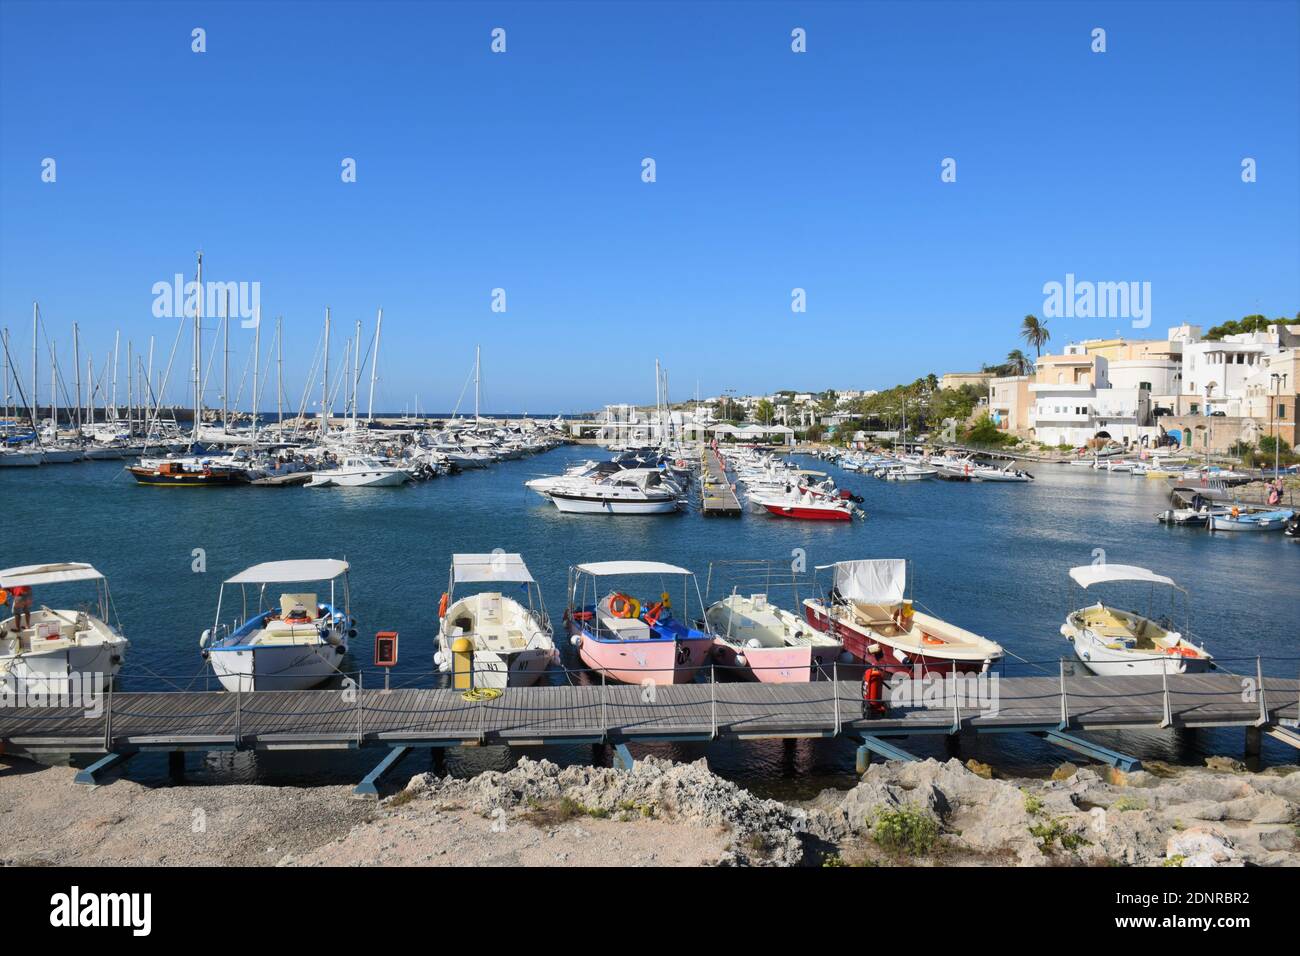 Boats Moored In Harbor Stock Photo